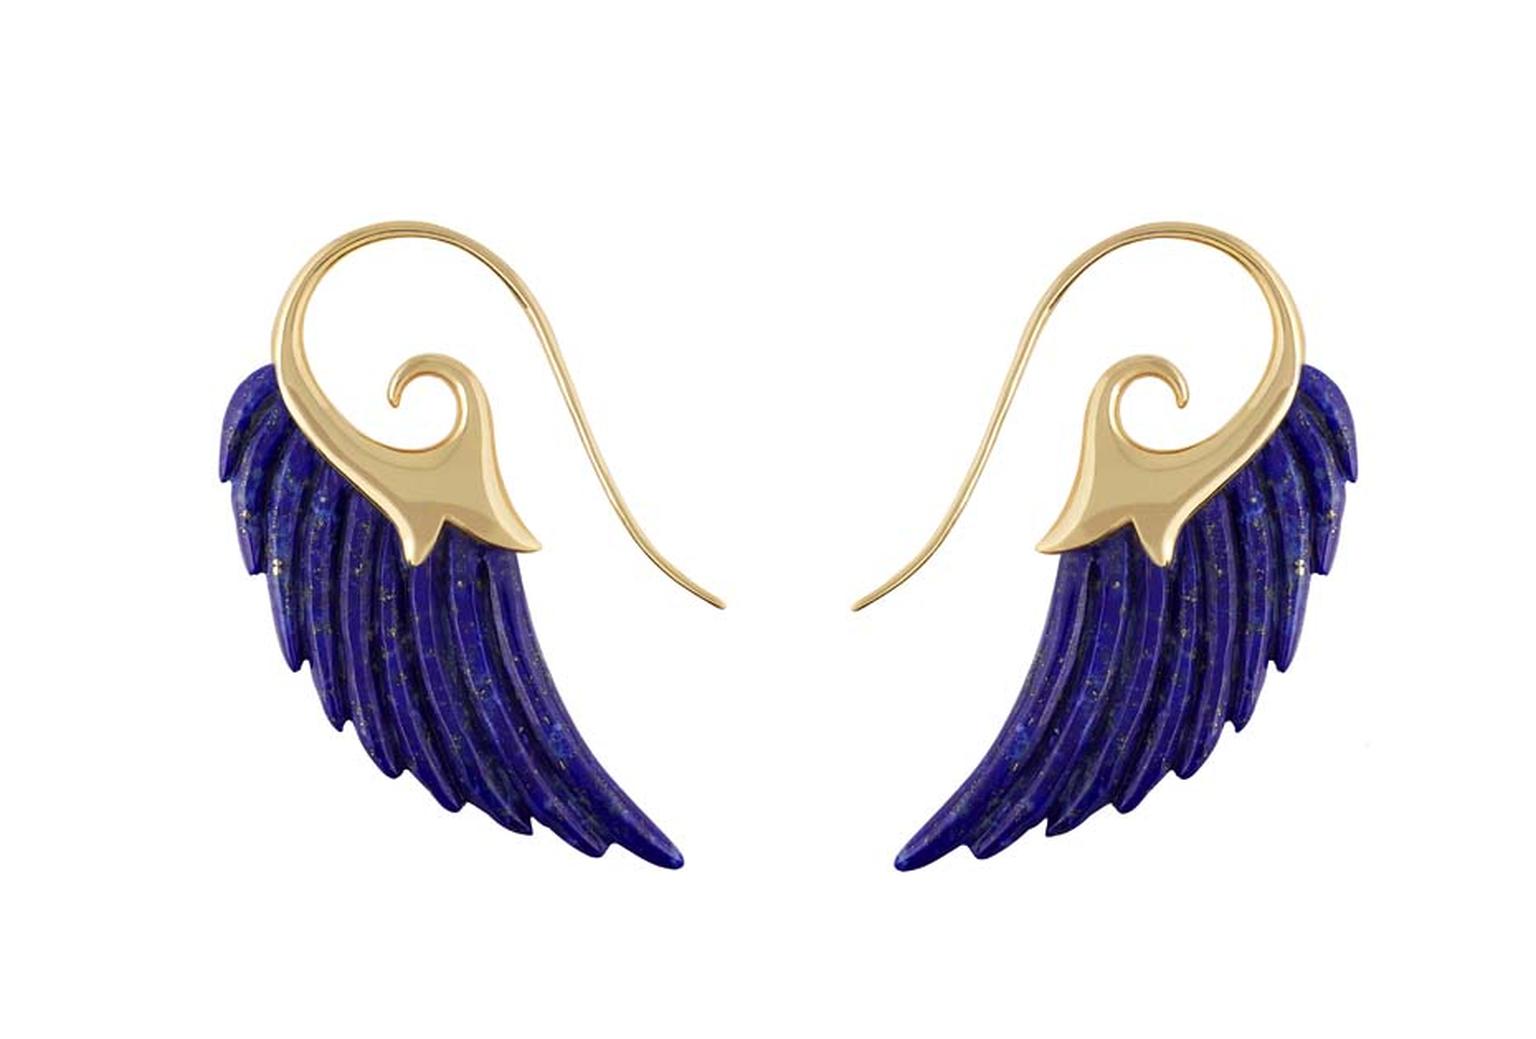 Noor Fares Fly Me to the Moon collection lapis lazuli earrings with internal gold flecks.